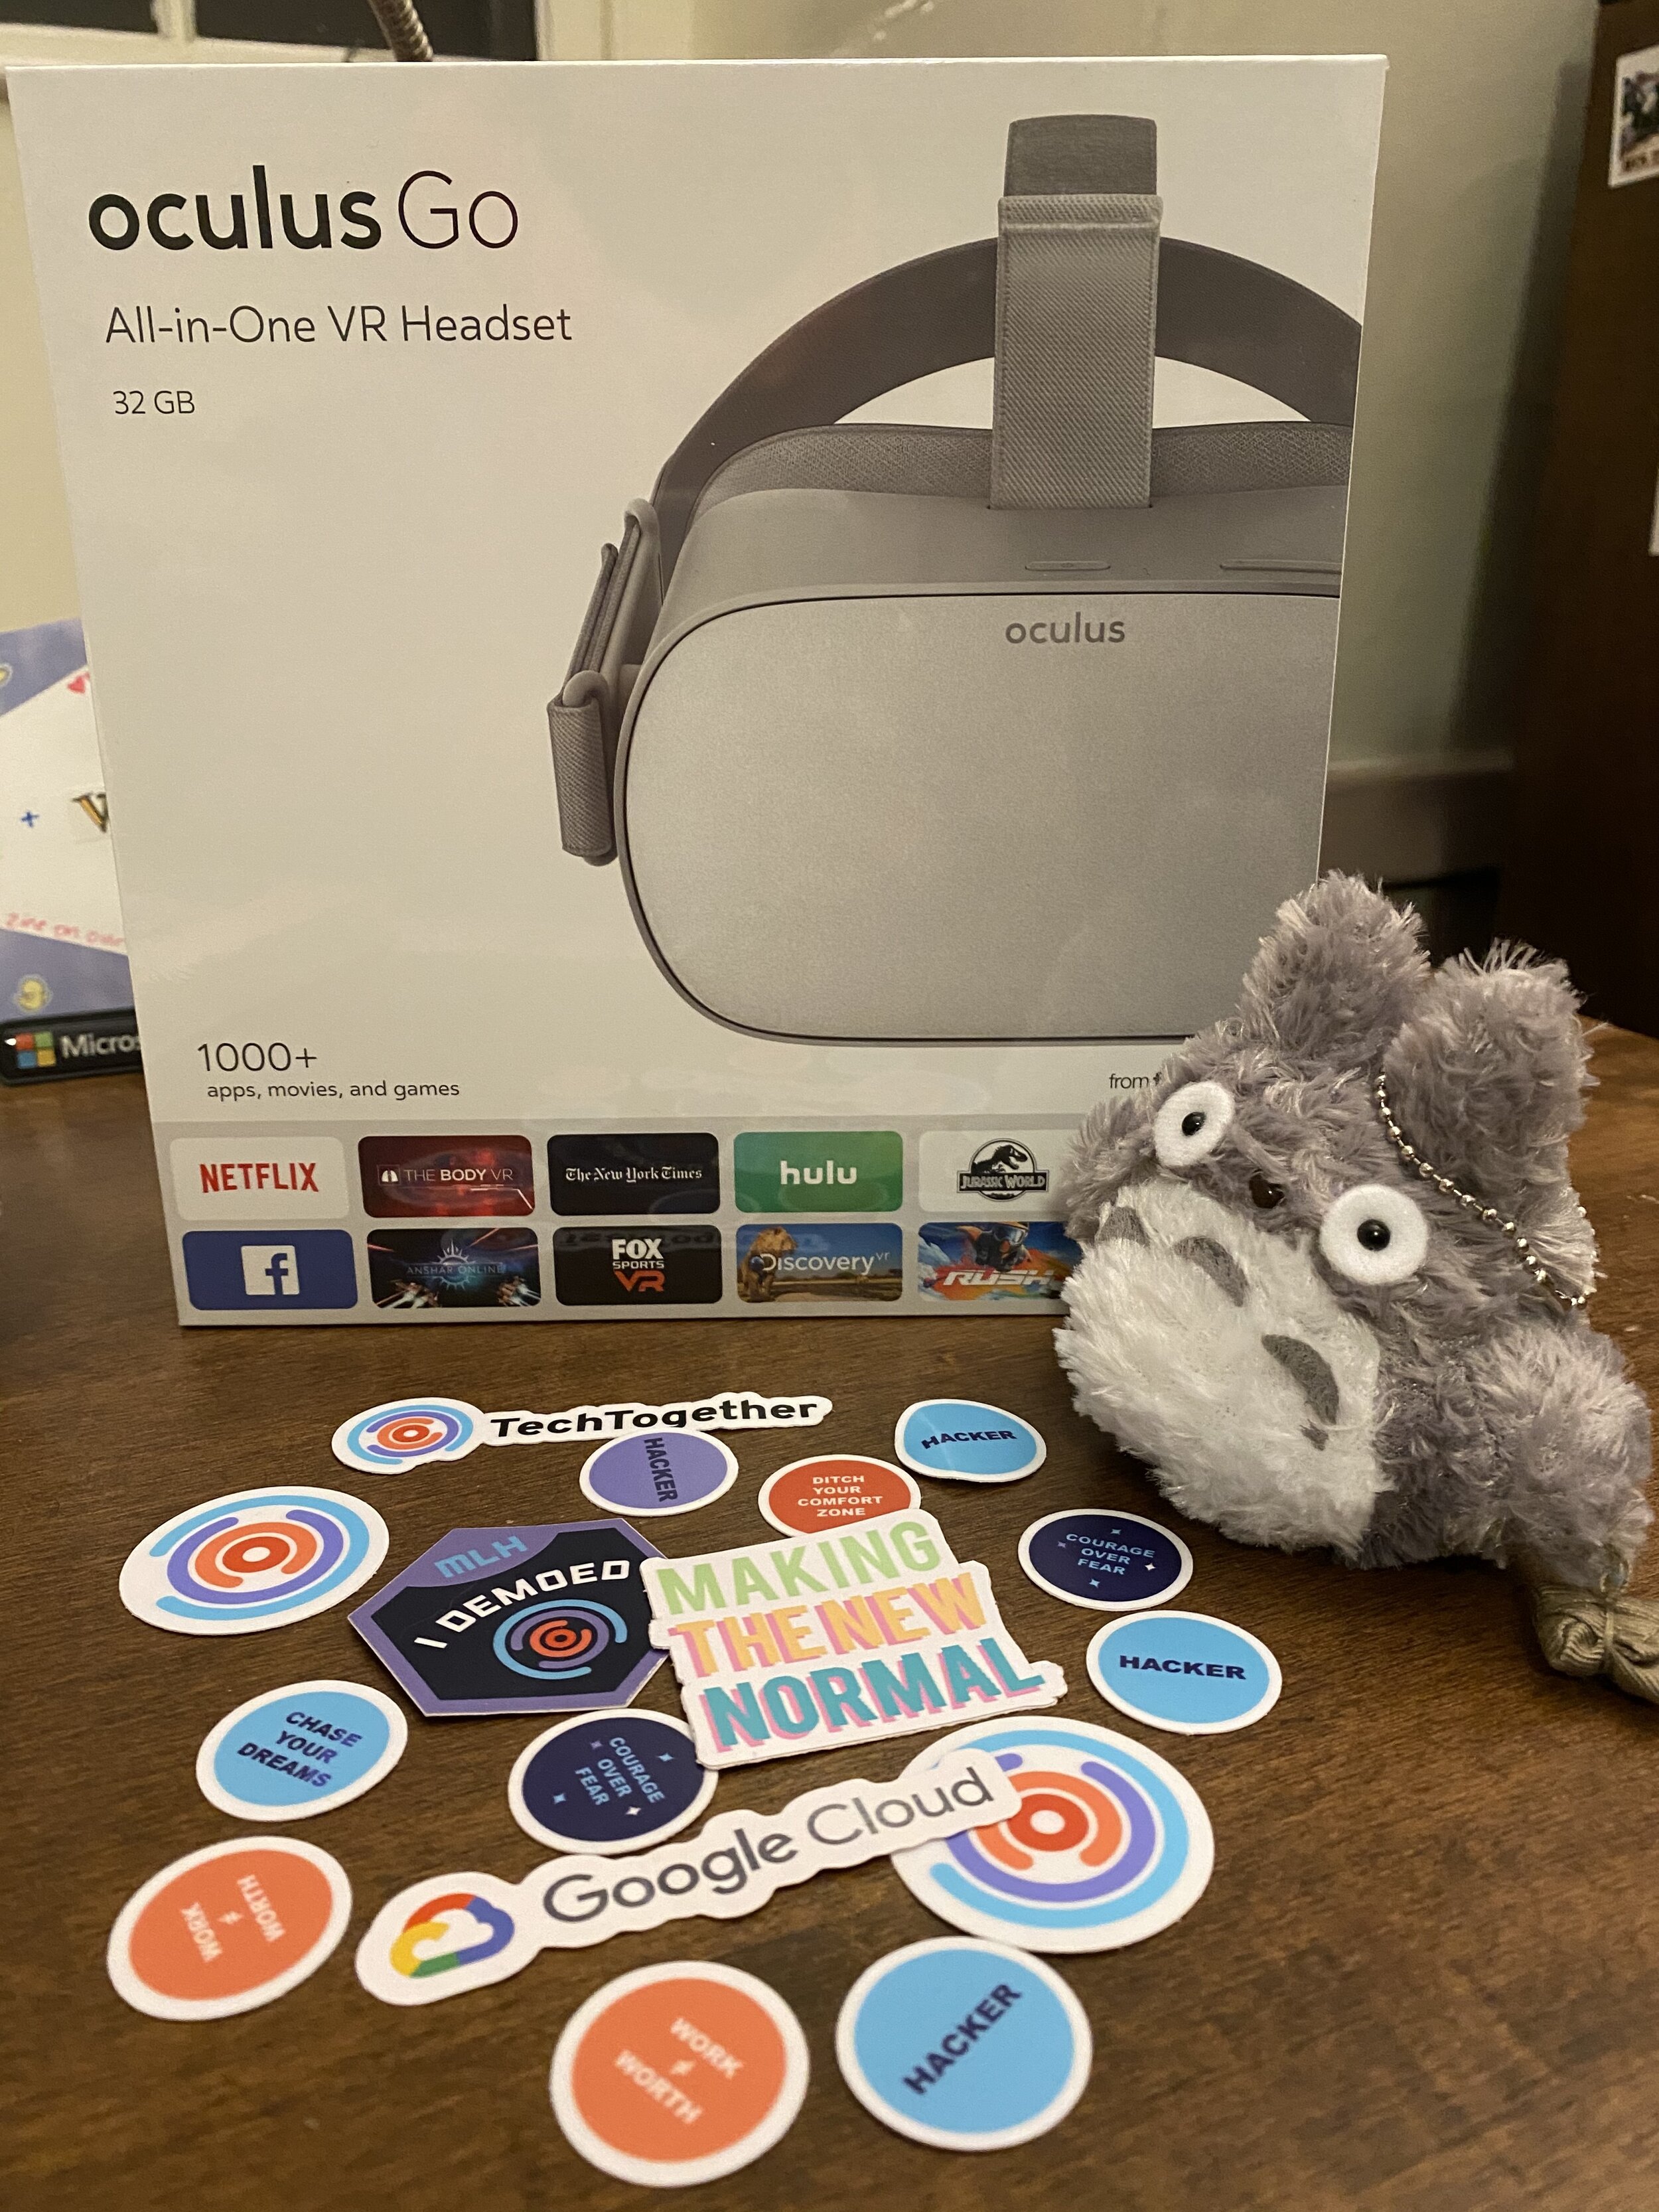  The Oculus Go I won (ft. many cool stickers and Totoro) 